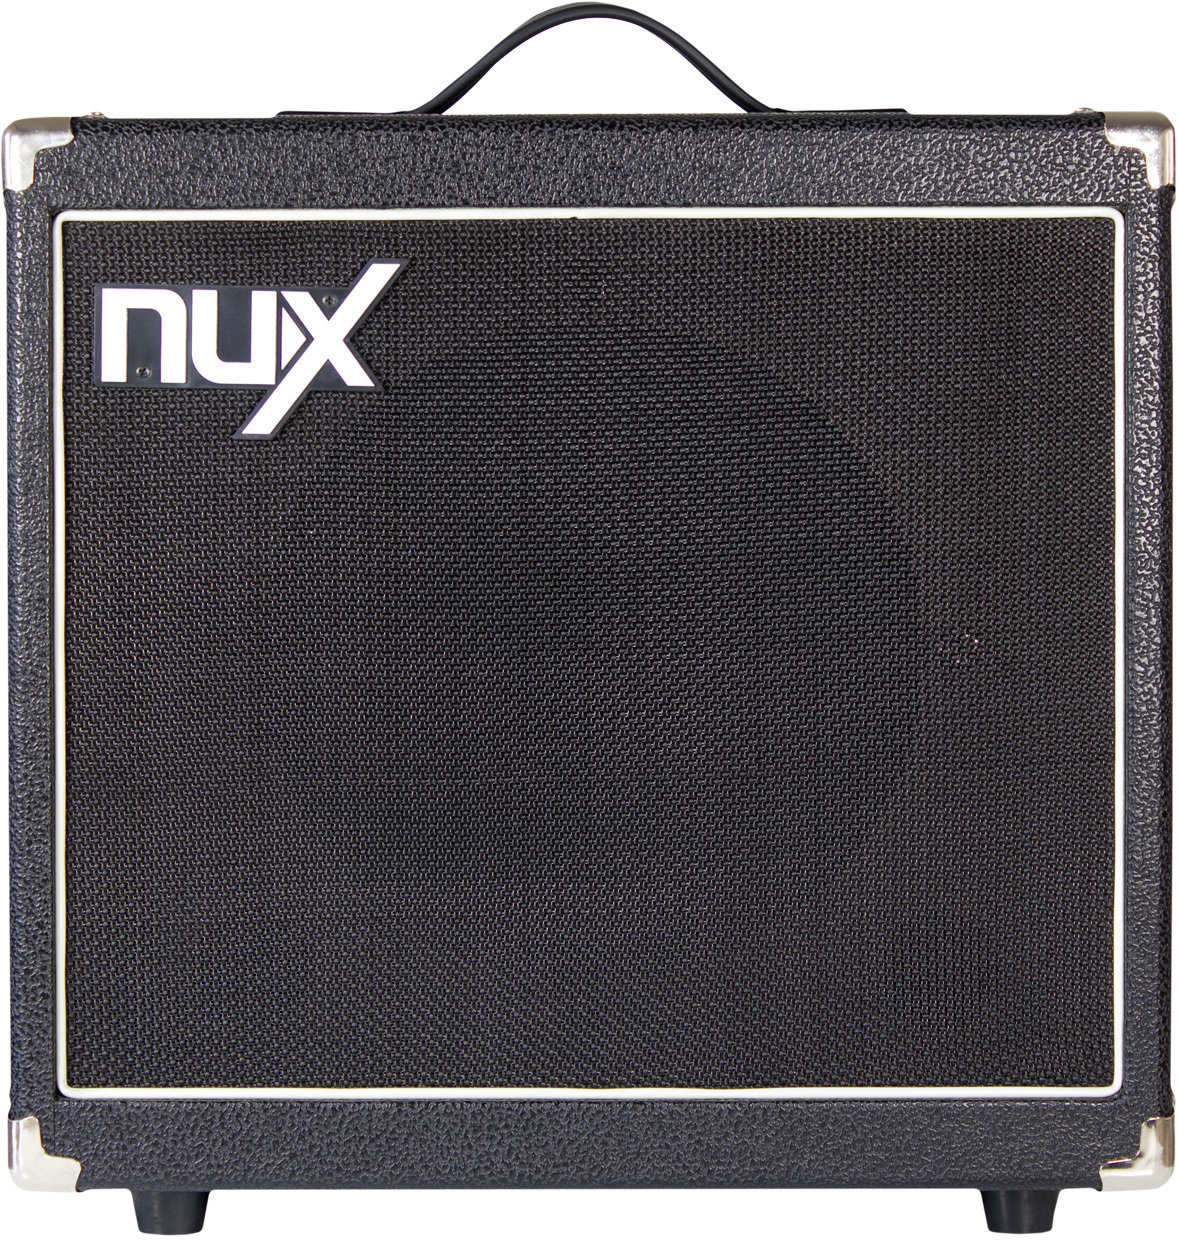 Solid-State Combo Nux Mighty 30 SE